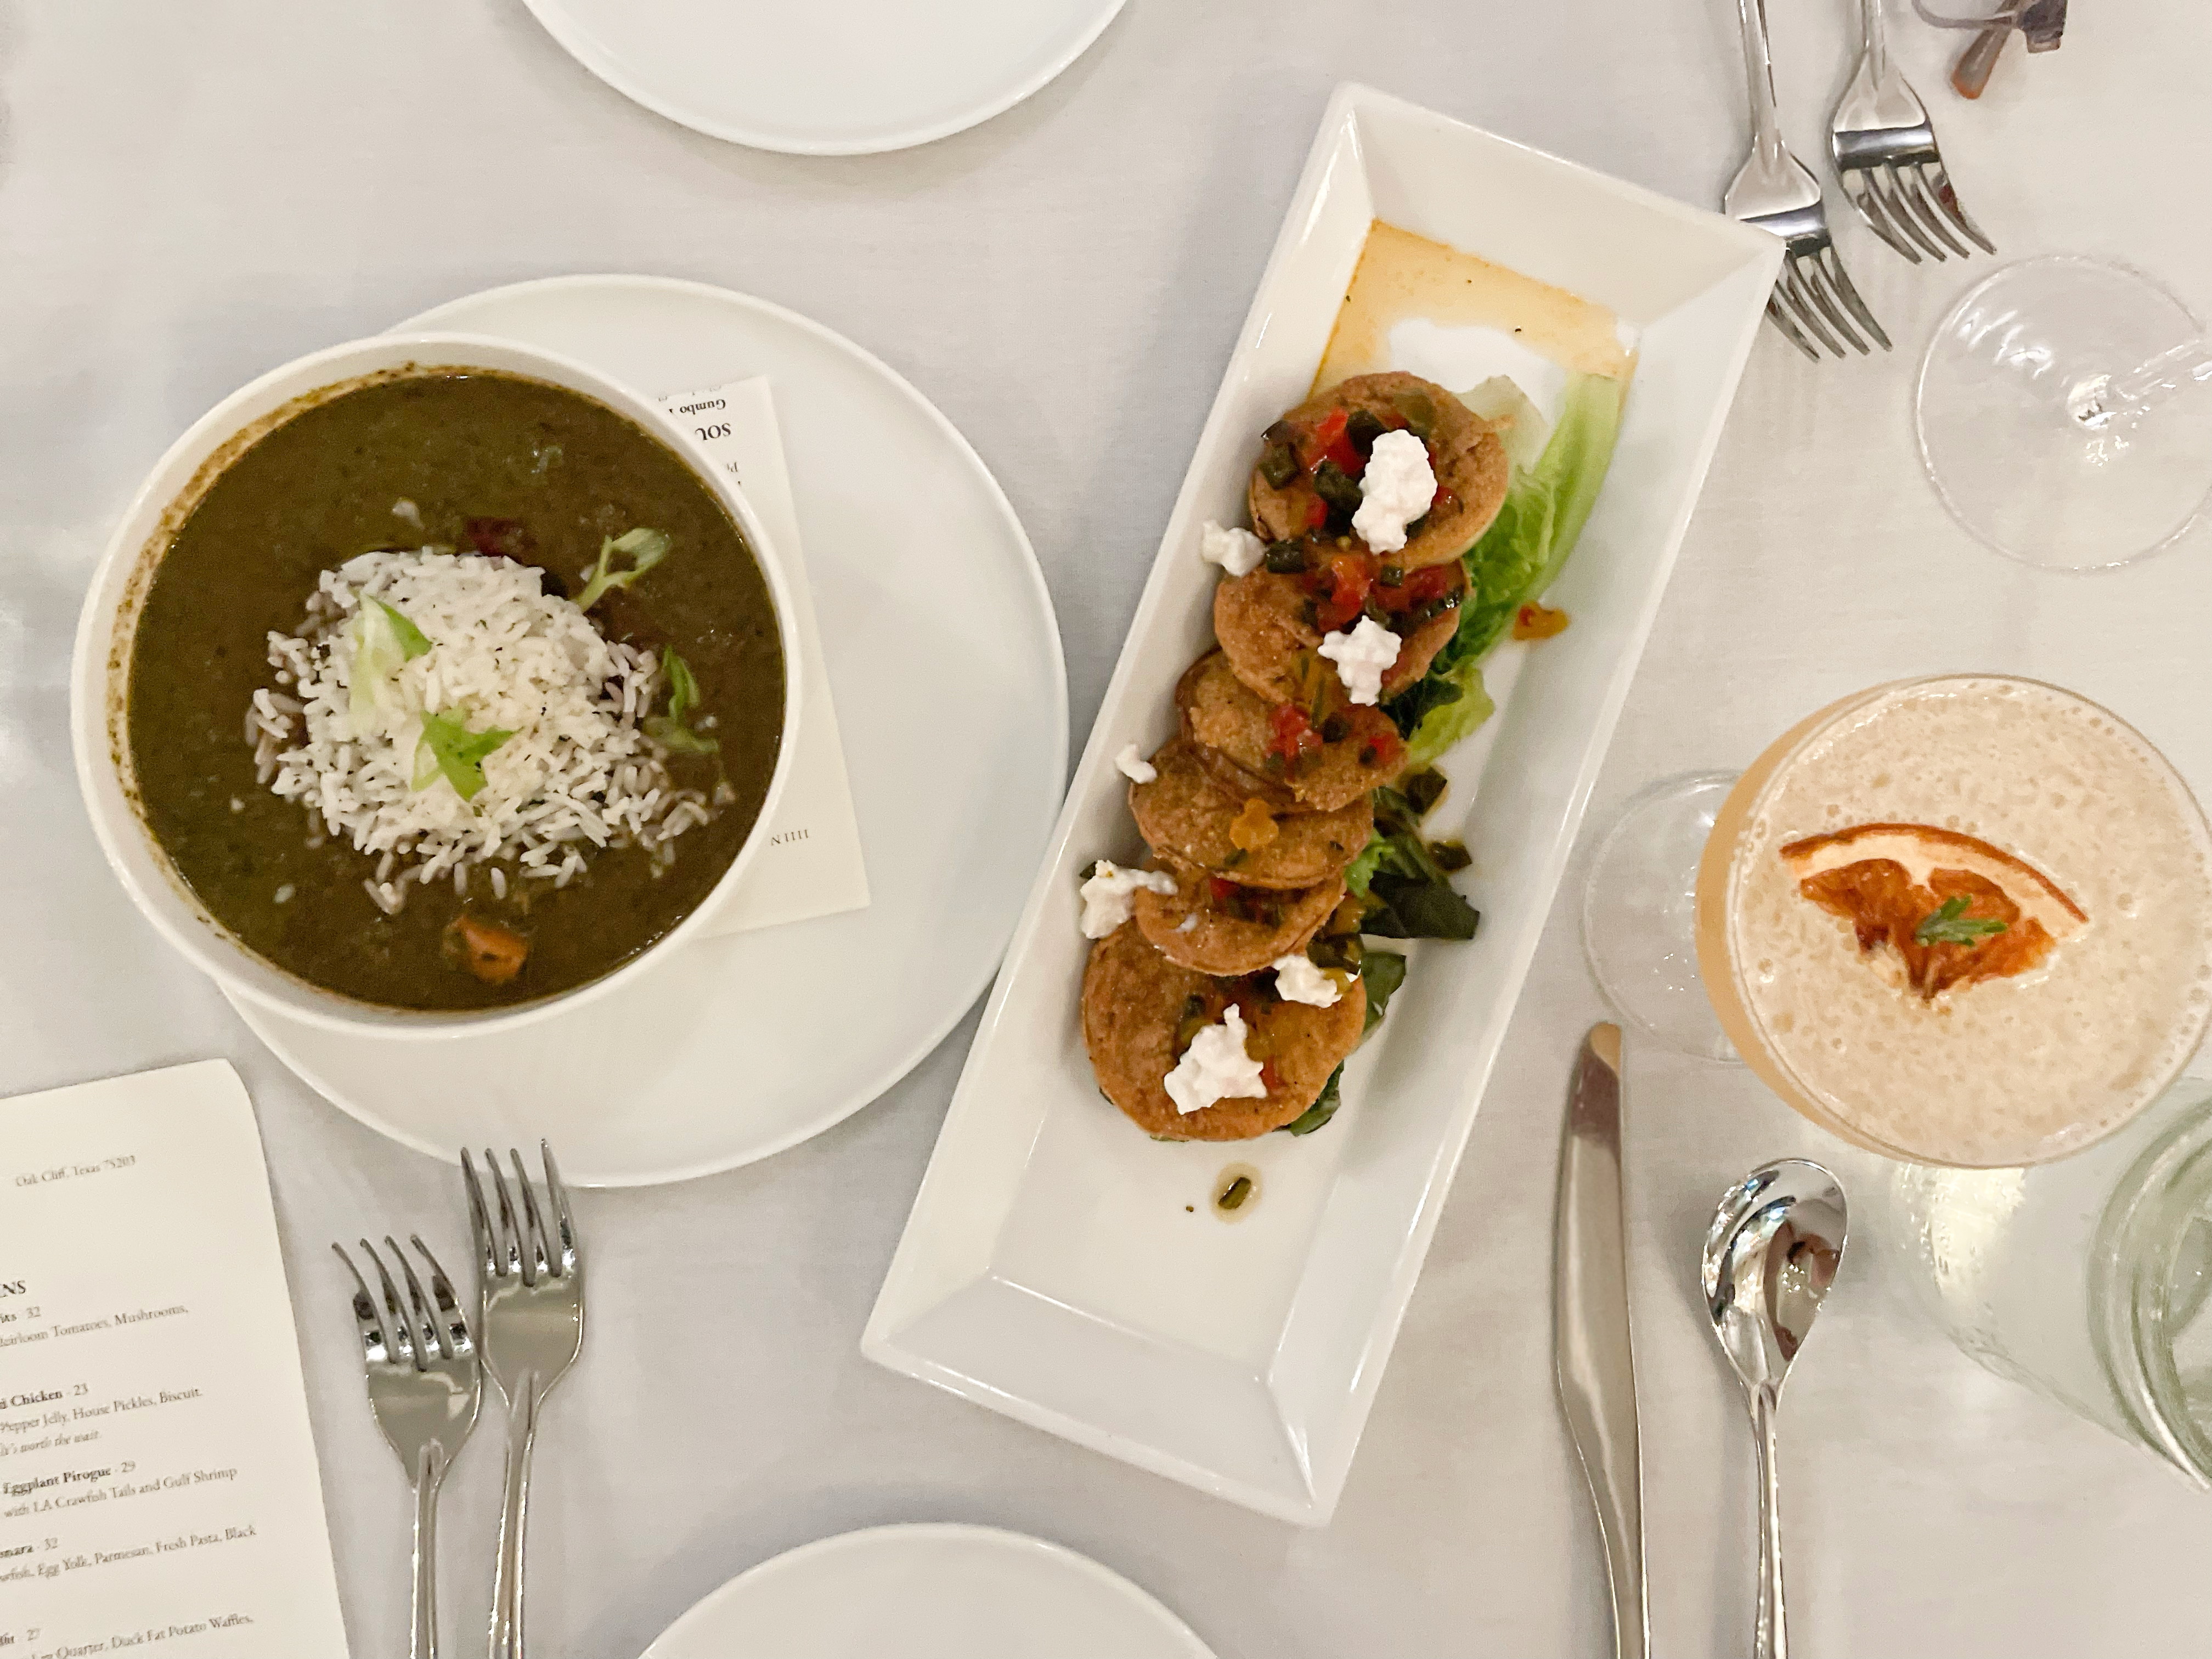 On table cover with a white tablecloth, set with silverware, a bow of gumbo sits to the left. In the middle is a tray dish of fried green tomatoes. And on the right is a light orange cocktail with a dried orange floating in it.